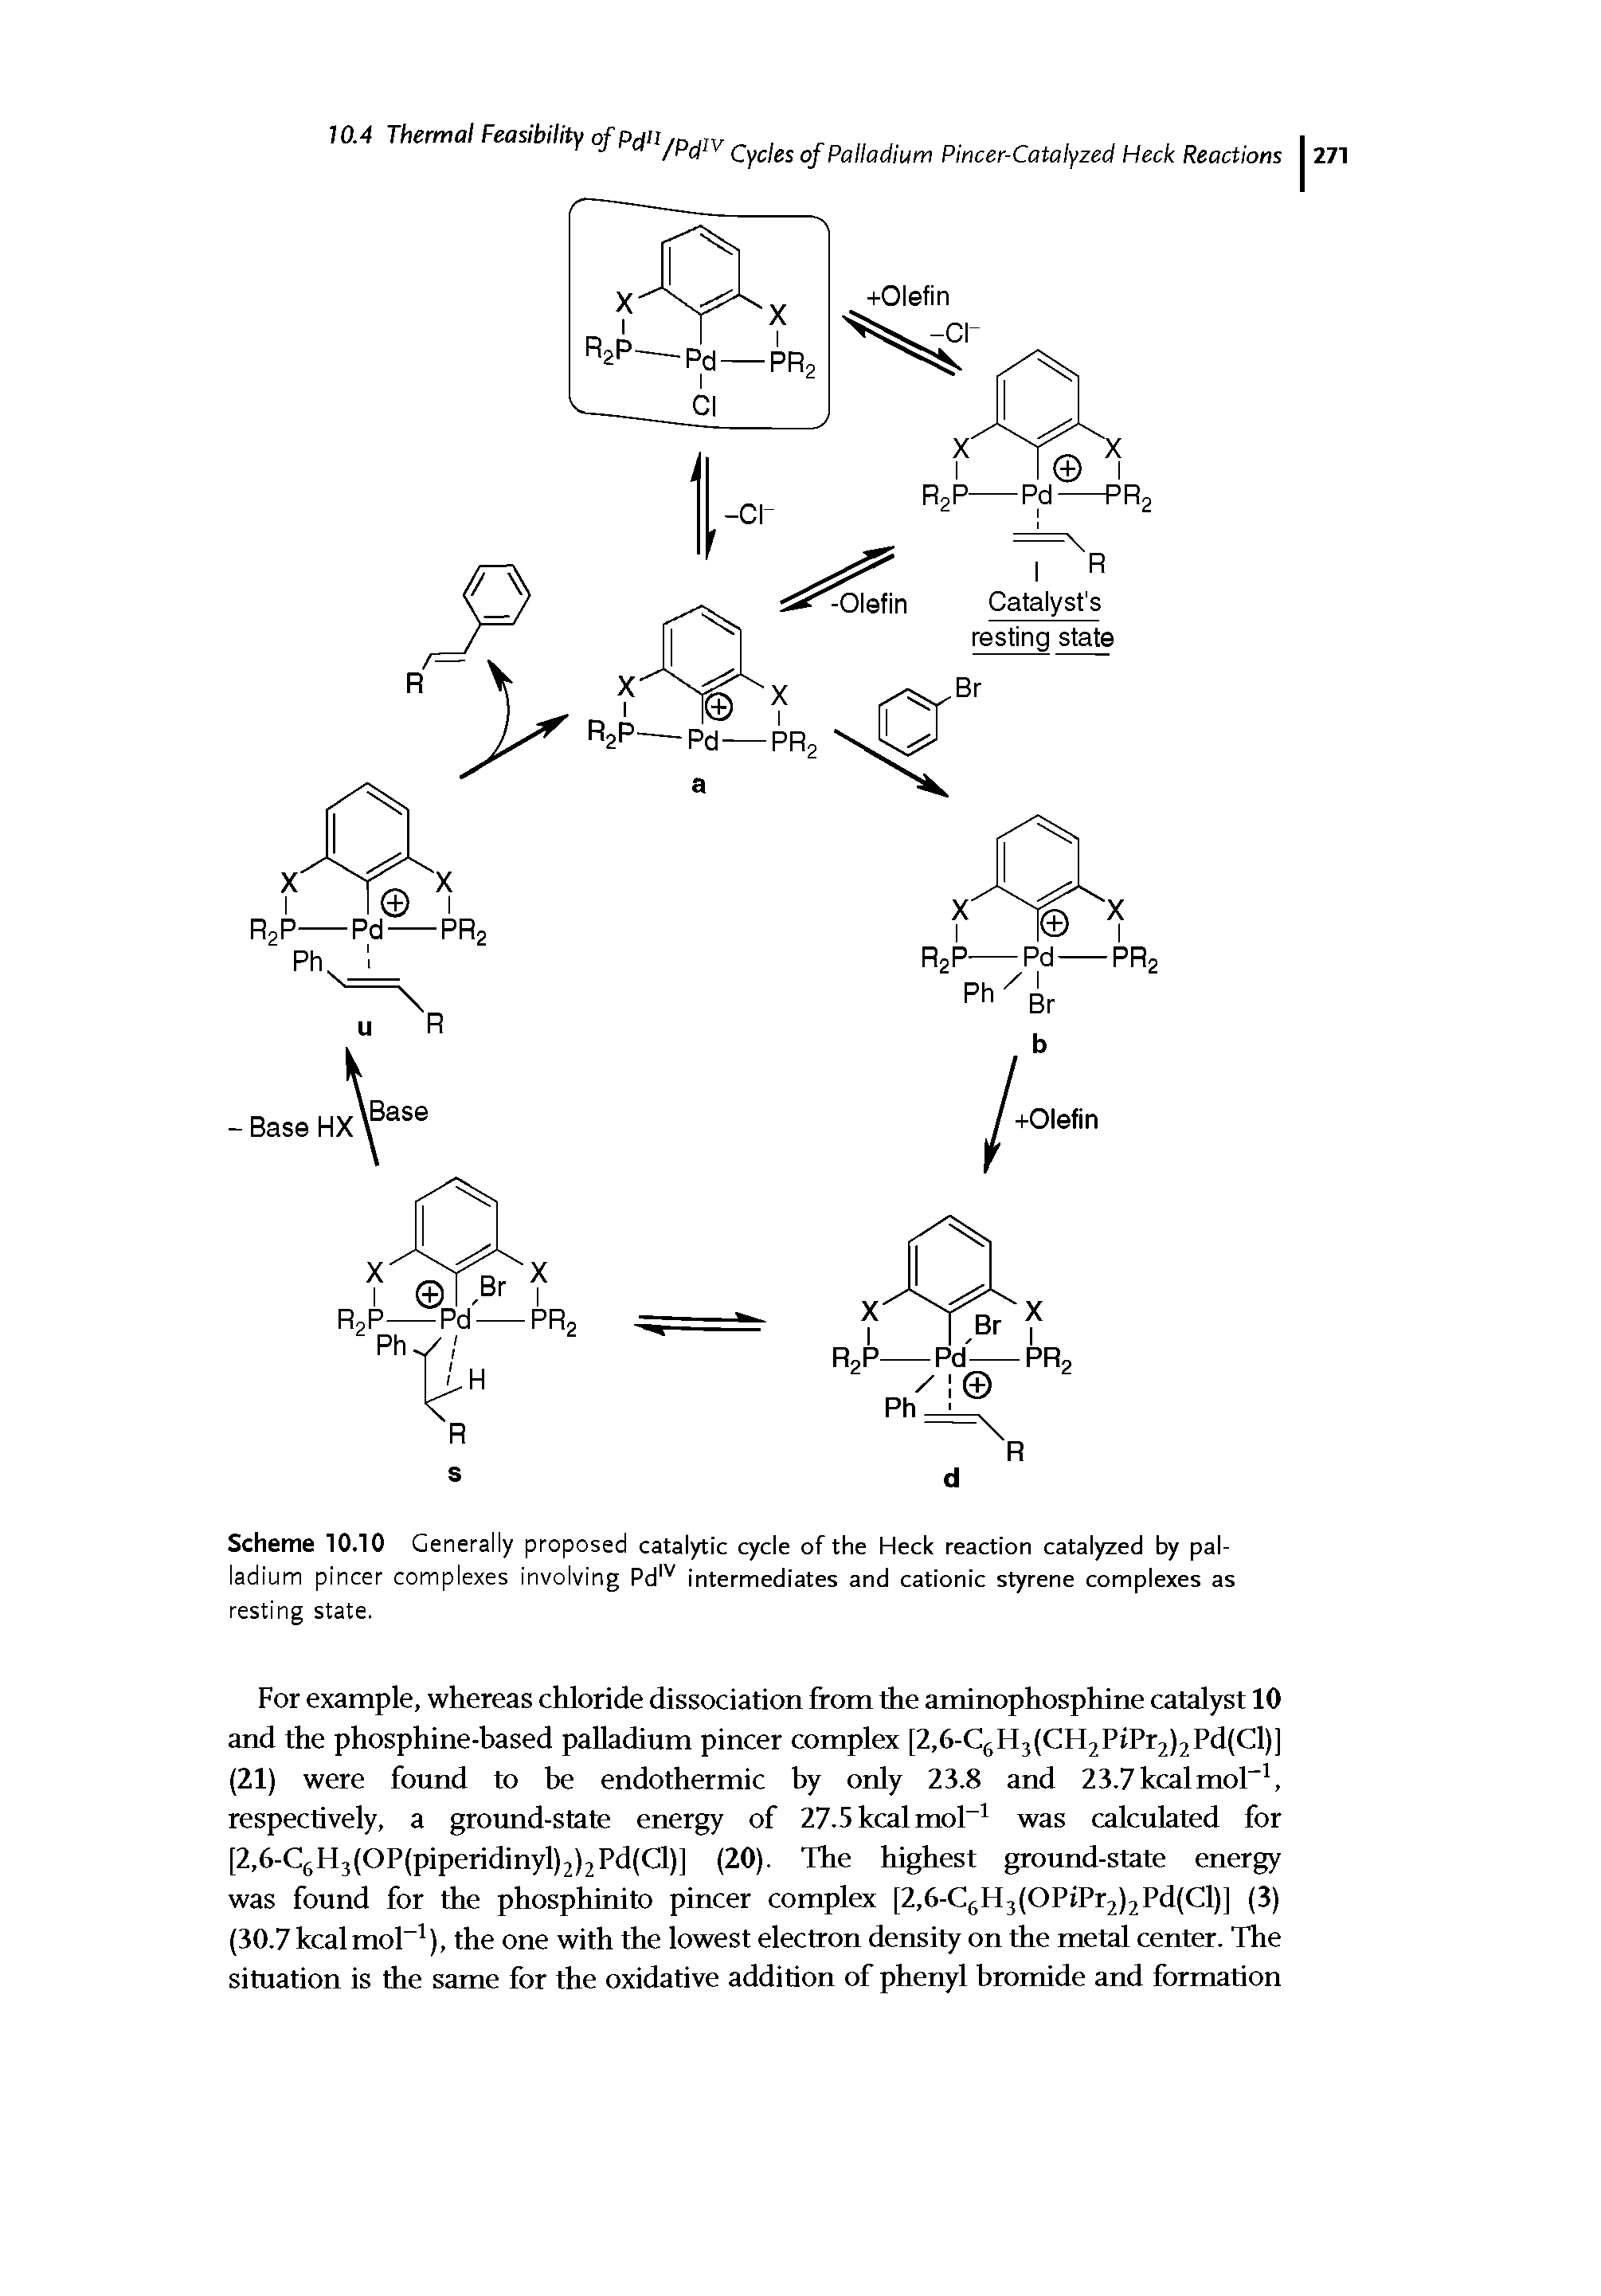 Scheme 10.10 Generally proposed catalytic cycle of the Heck reaction catalyzed by palladium pincer complexes involving Pd intermediates and cationic styrene complexes as resting state.